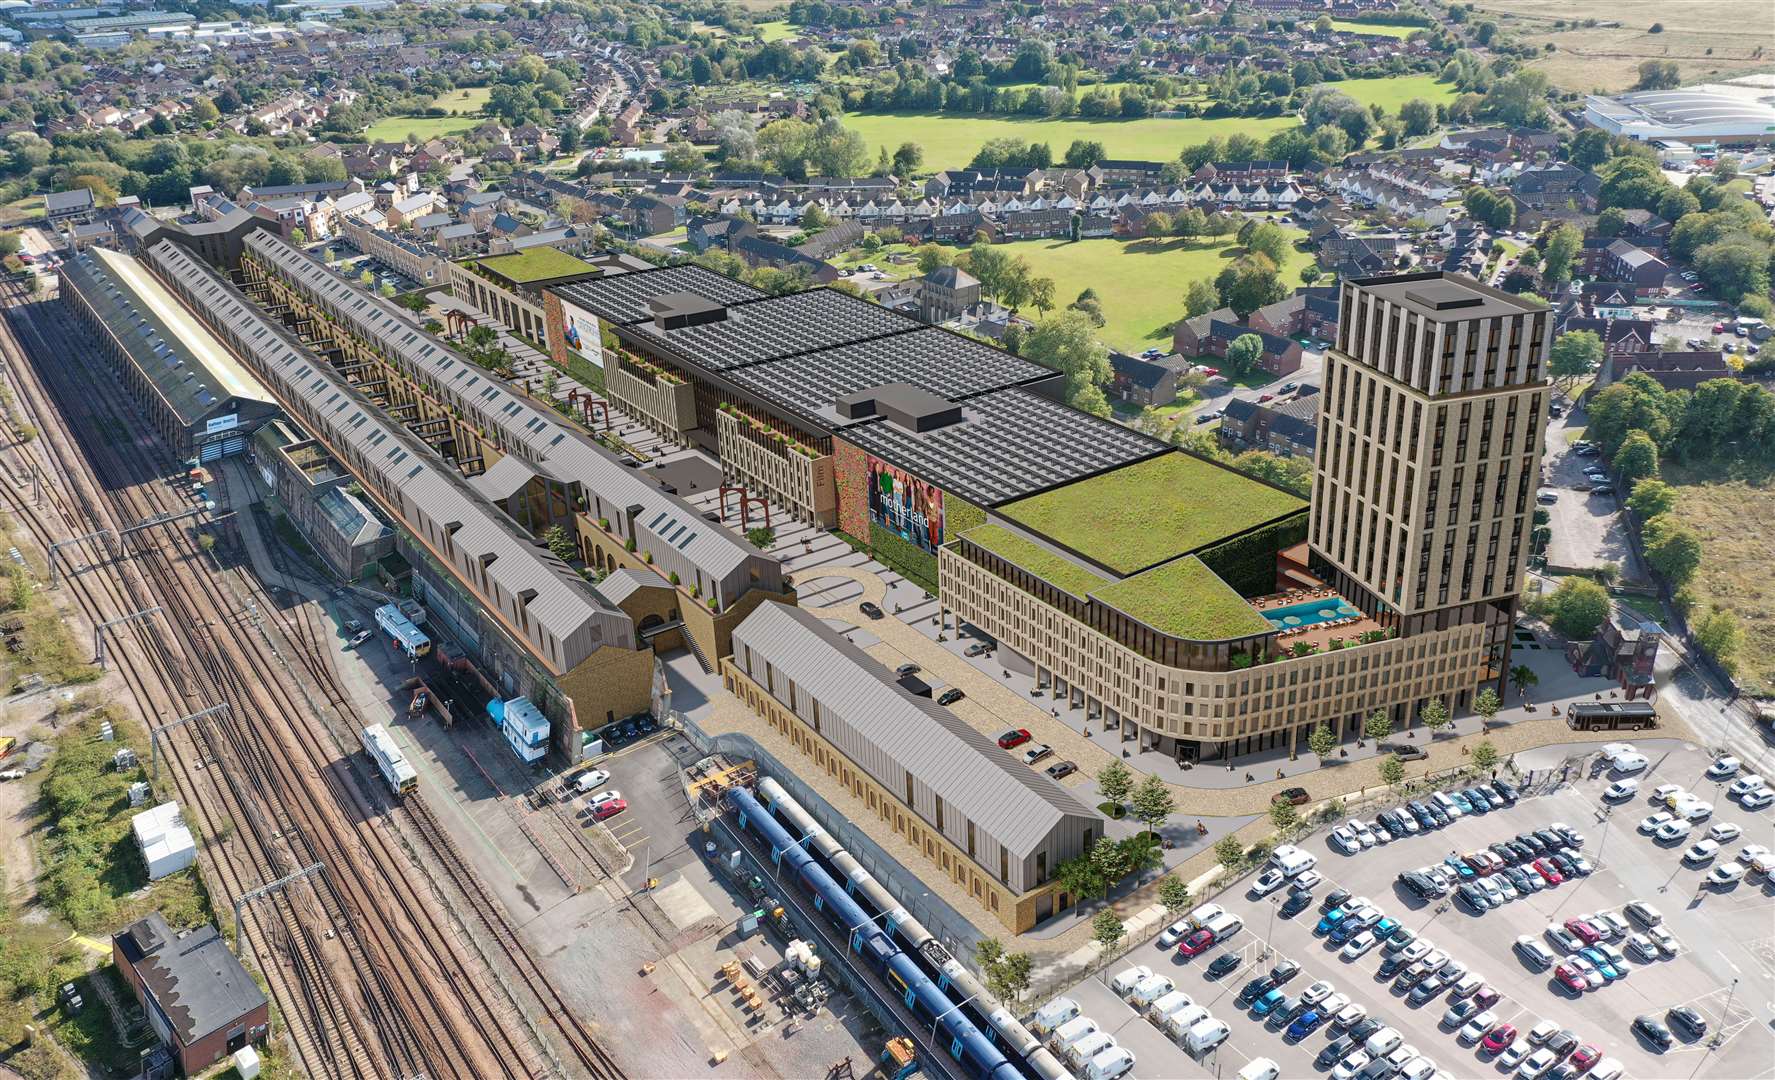 An aerial view of the new film studio complex, including 7,440 sq m of studios, supporting workshop and commercial floorspace, production offices and a media village. Developers are also planning a gym, cafe and a 120-bedroom hotel over 18 storeys, which is shown at the right of this image next to the old clock tower off Newtown Road. The clock tower entrance - which will feature traffic lights - will form one of three access points to the site. The green structure to the left of the hotel is the 336-space five-storey car park, which will include 35 disabled spaces